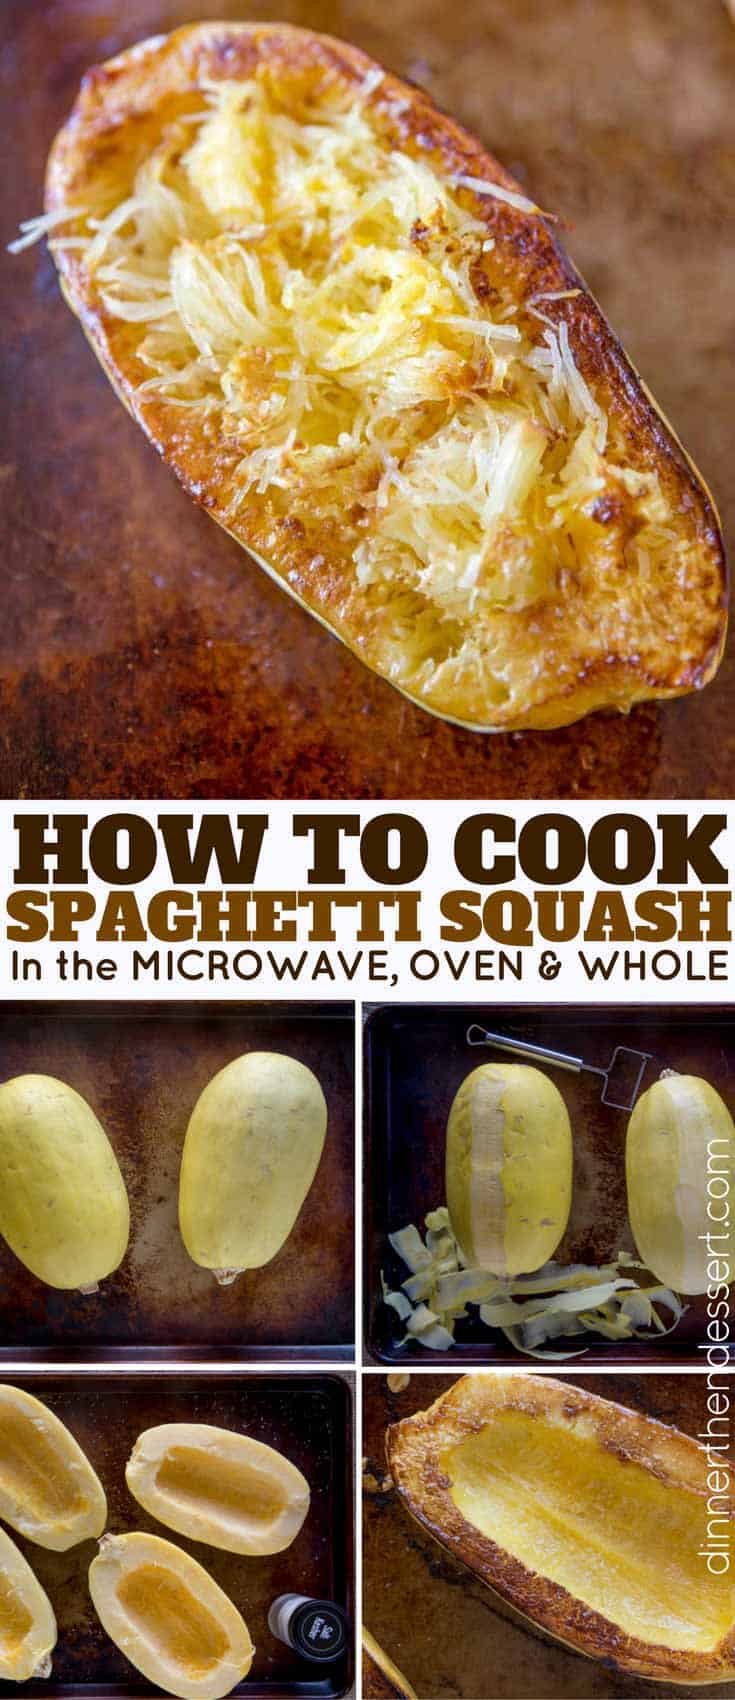 How To Cut, Cook and Season Spaghetti Squash in the Oven and Microwave EASILY!